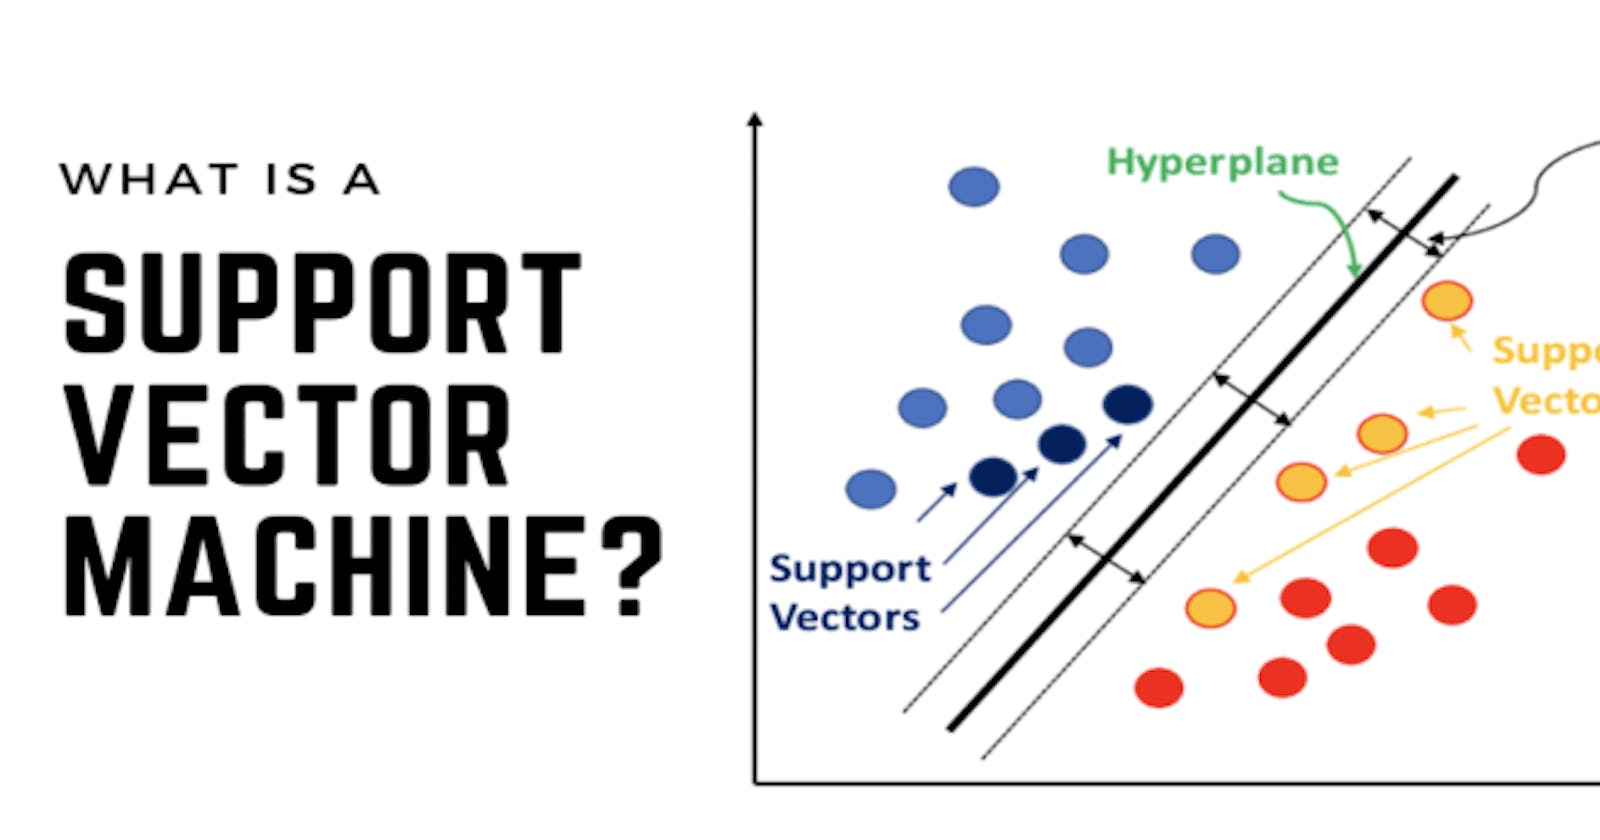 Support Vector Machines (SVM): A Simple Guide